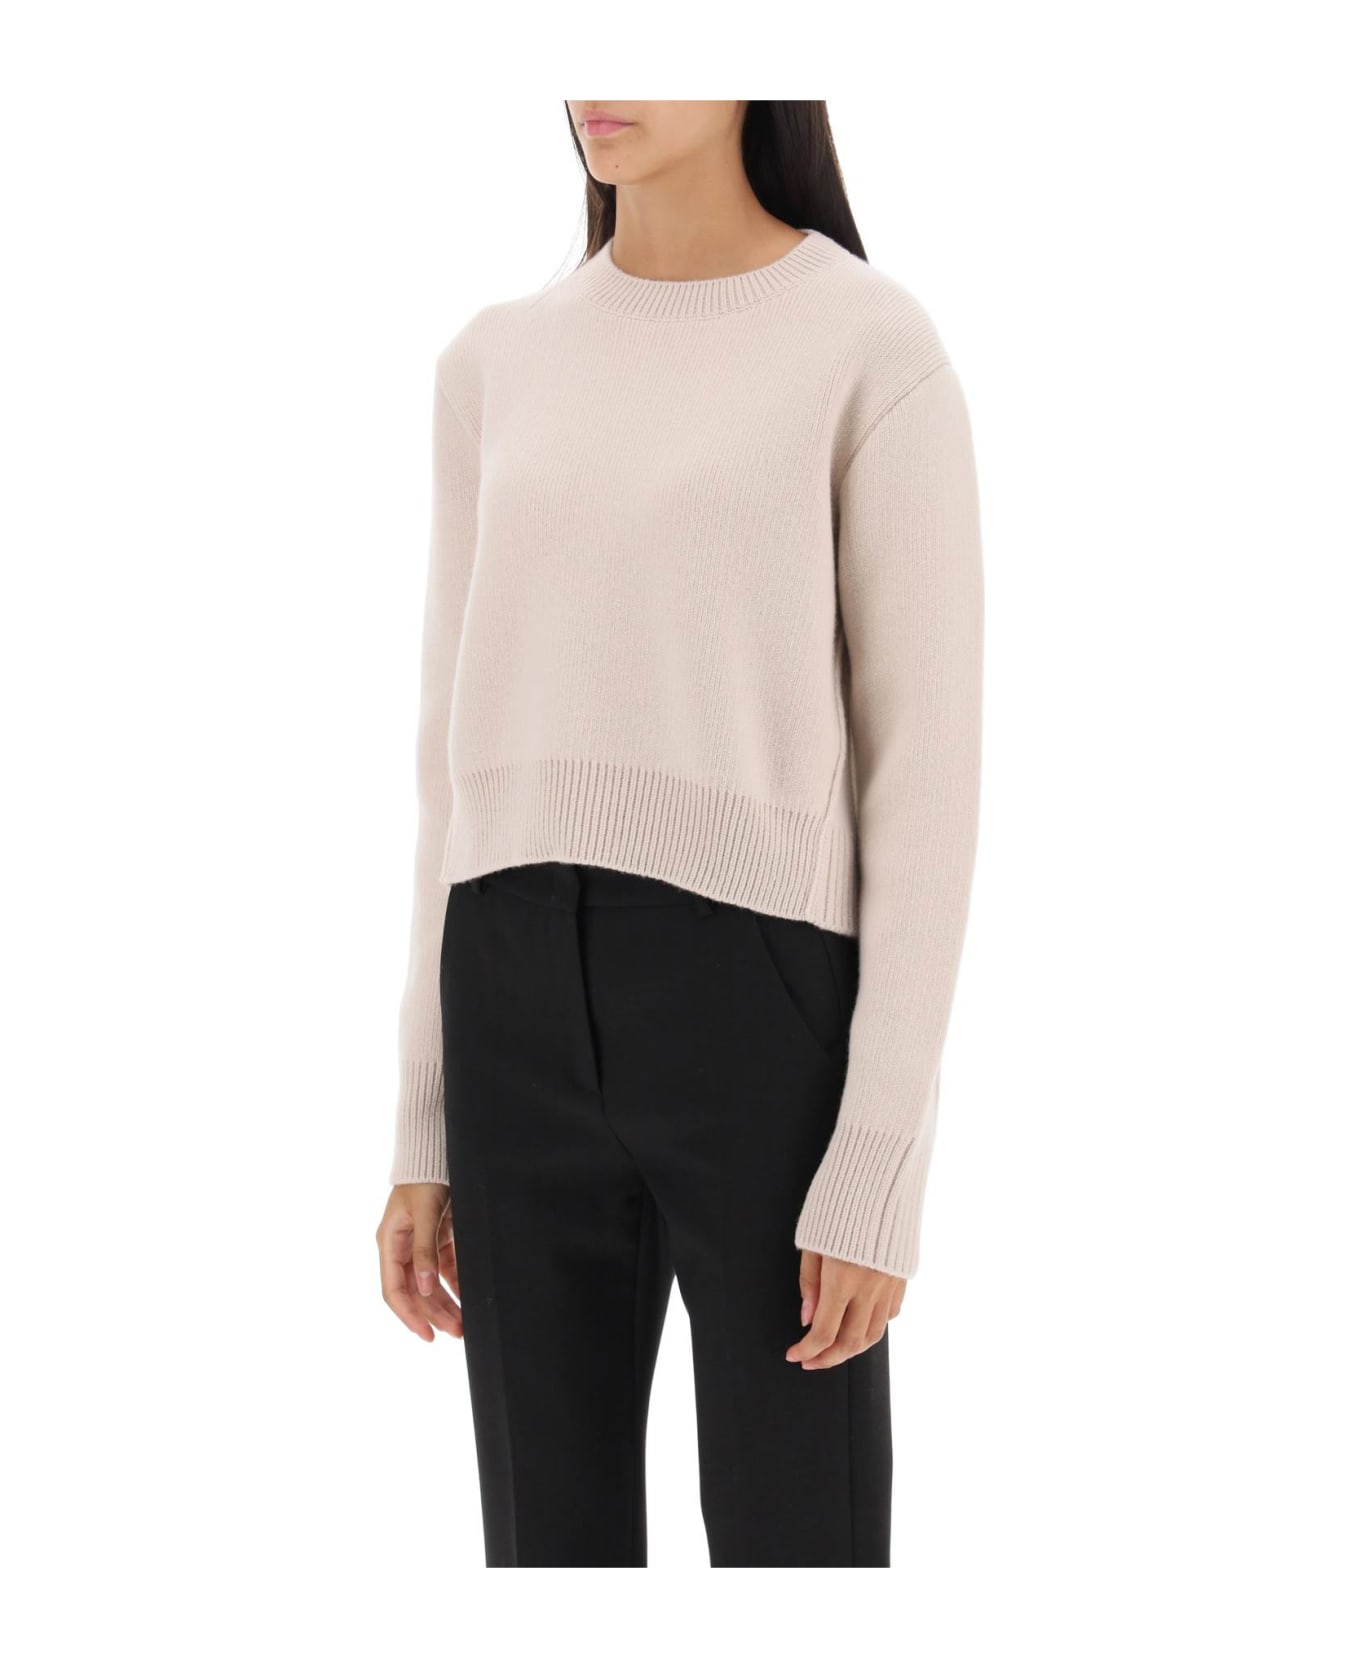 Lanvin Cropped Wool And Cashmere Sweater - PAPER (Beige)